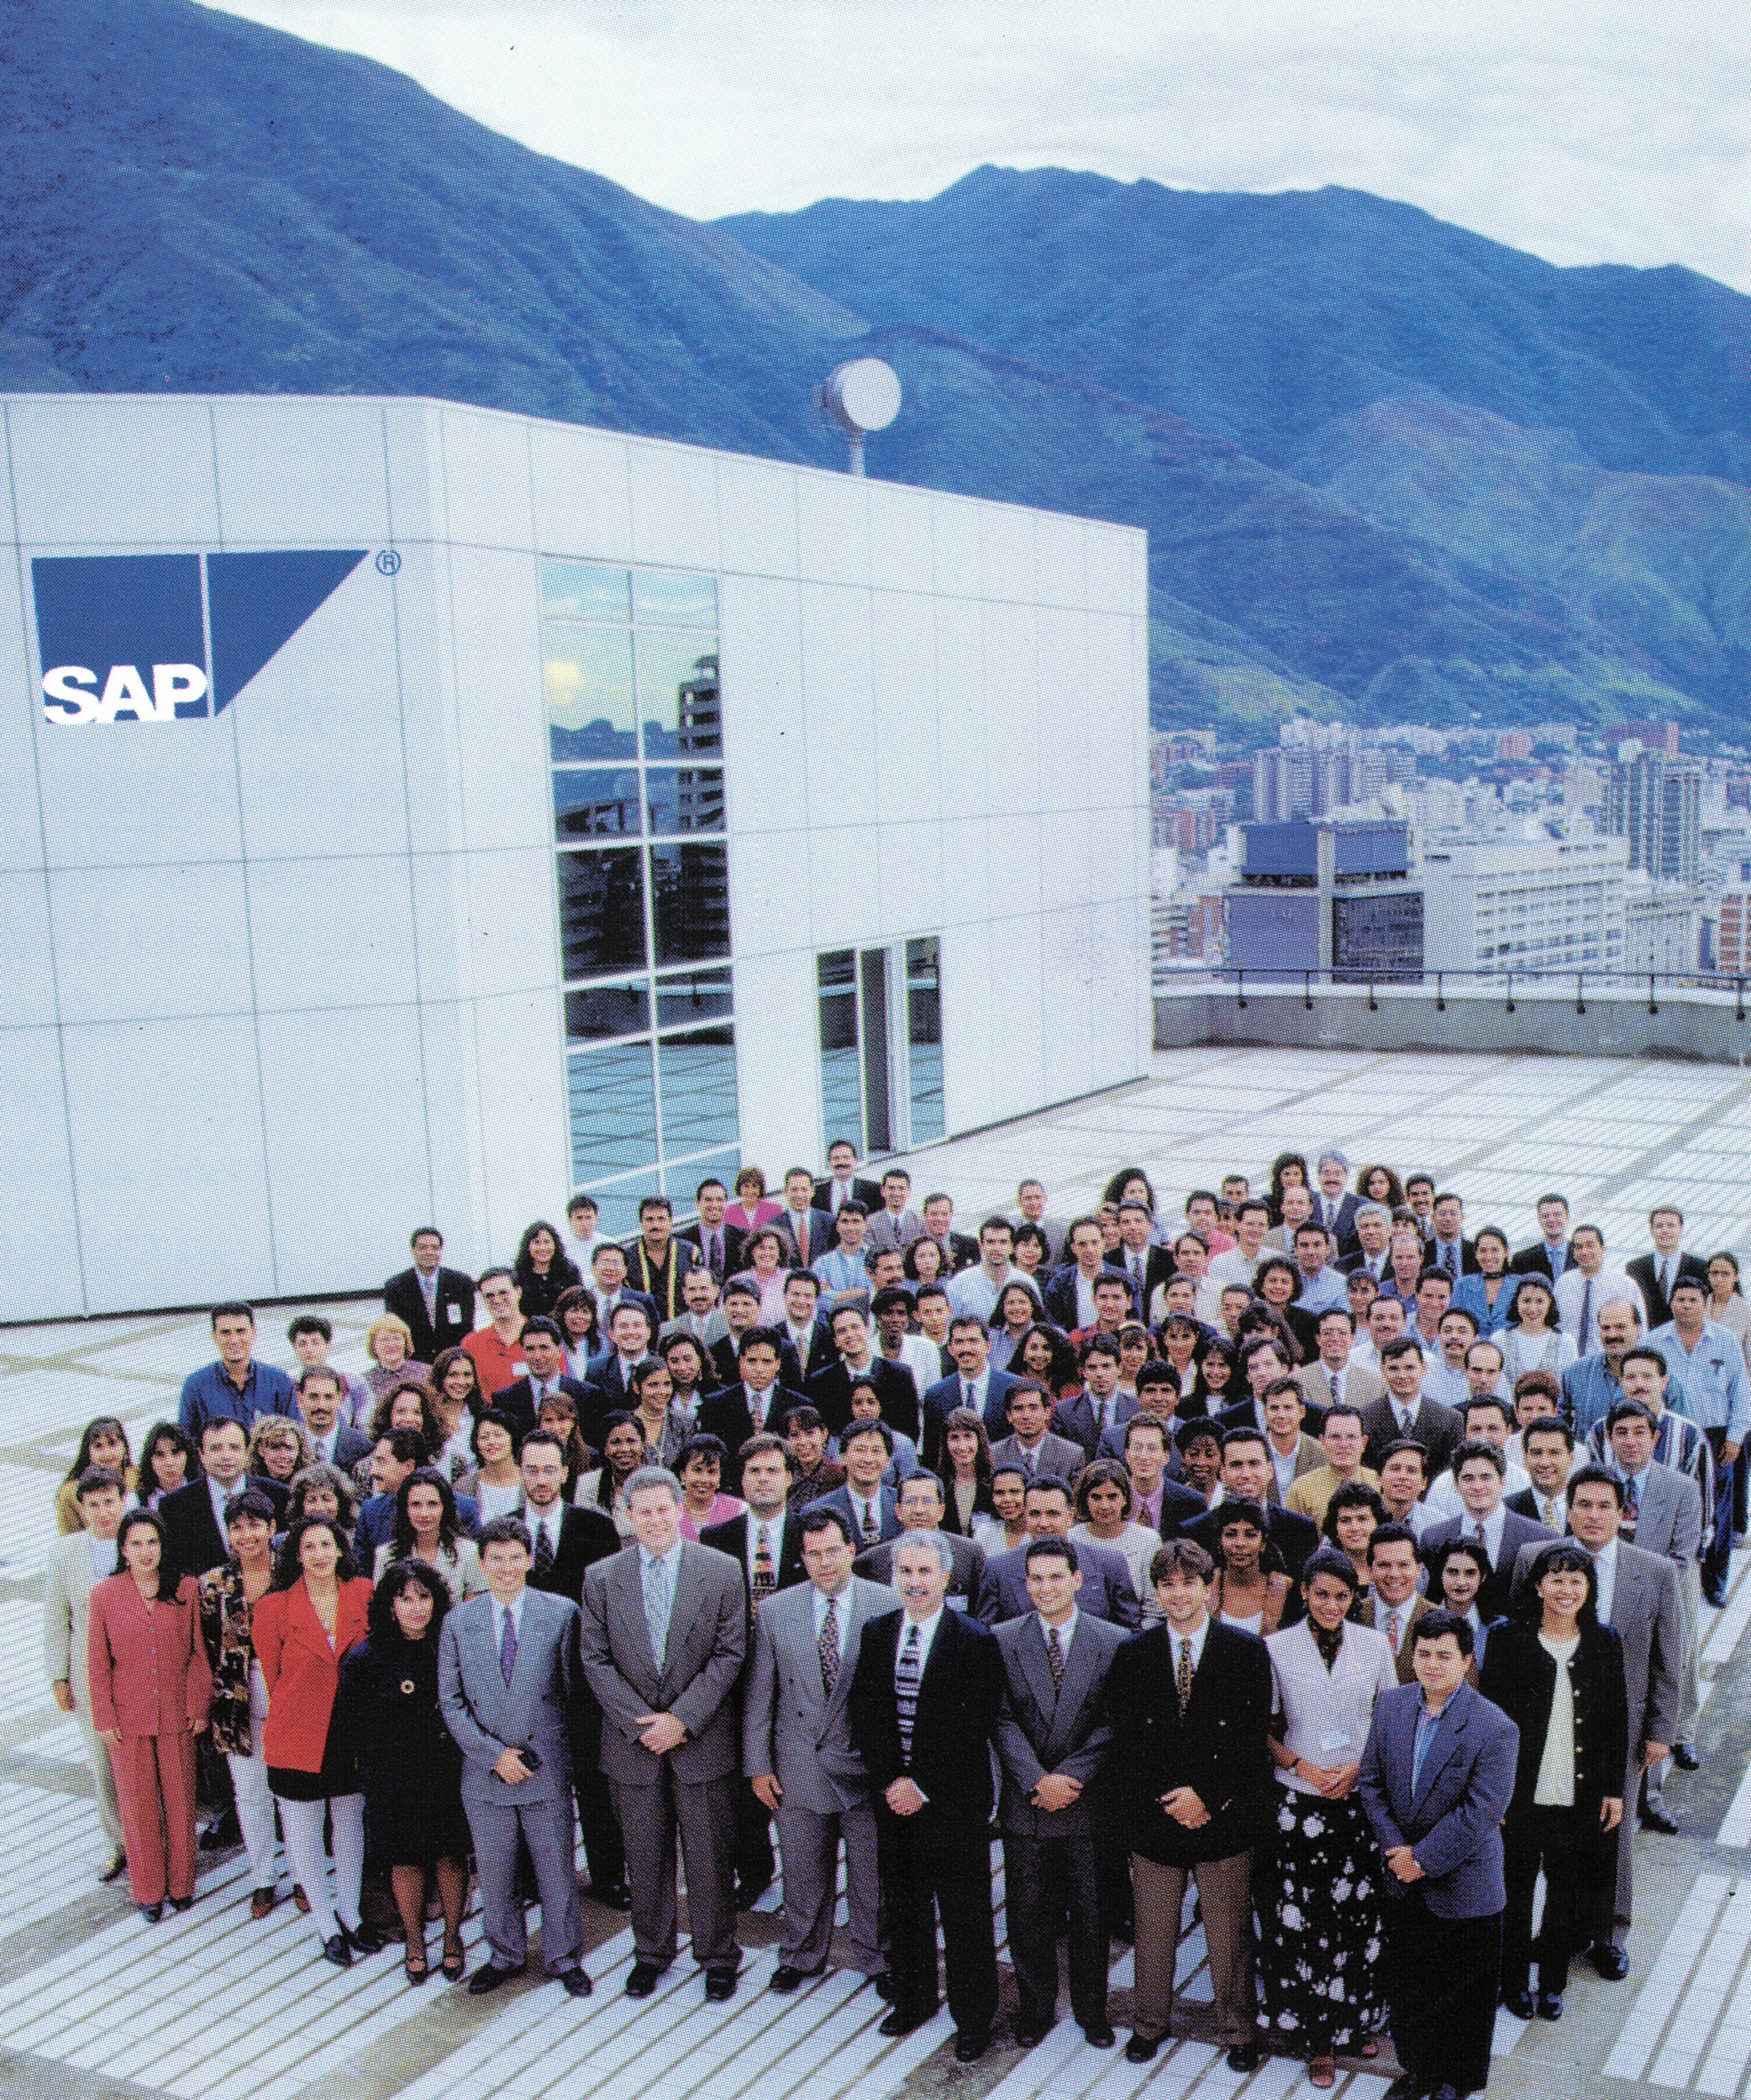 Employees from SAP in Latin America in Caracas